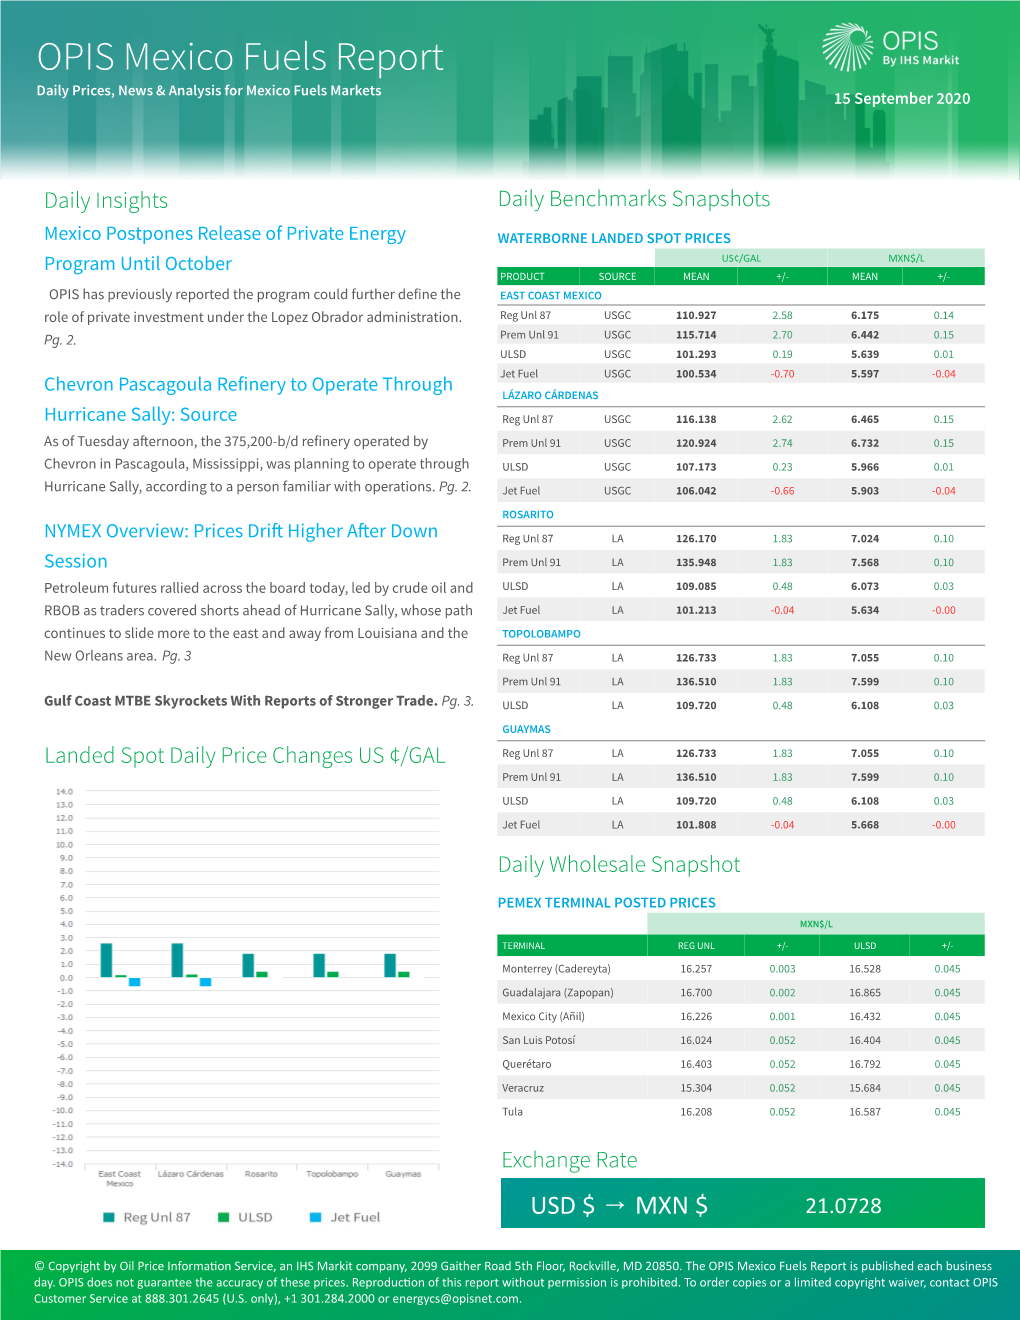 OPIS Mexico Fuels Report Daily Prices, News & Analysis for Mexico Fuels Markets 15 September 2020